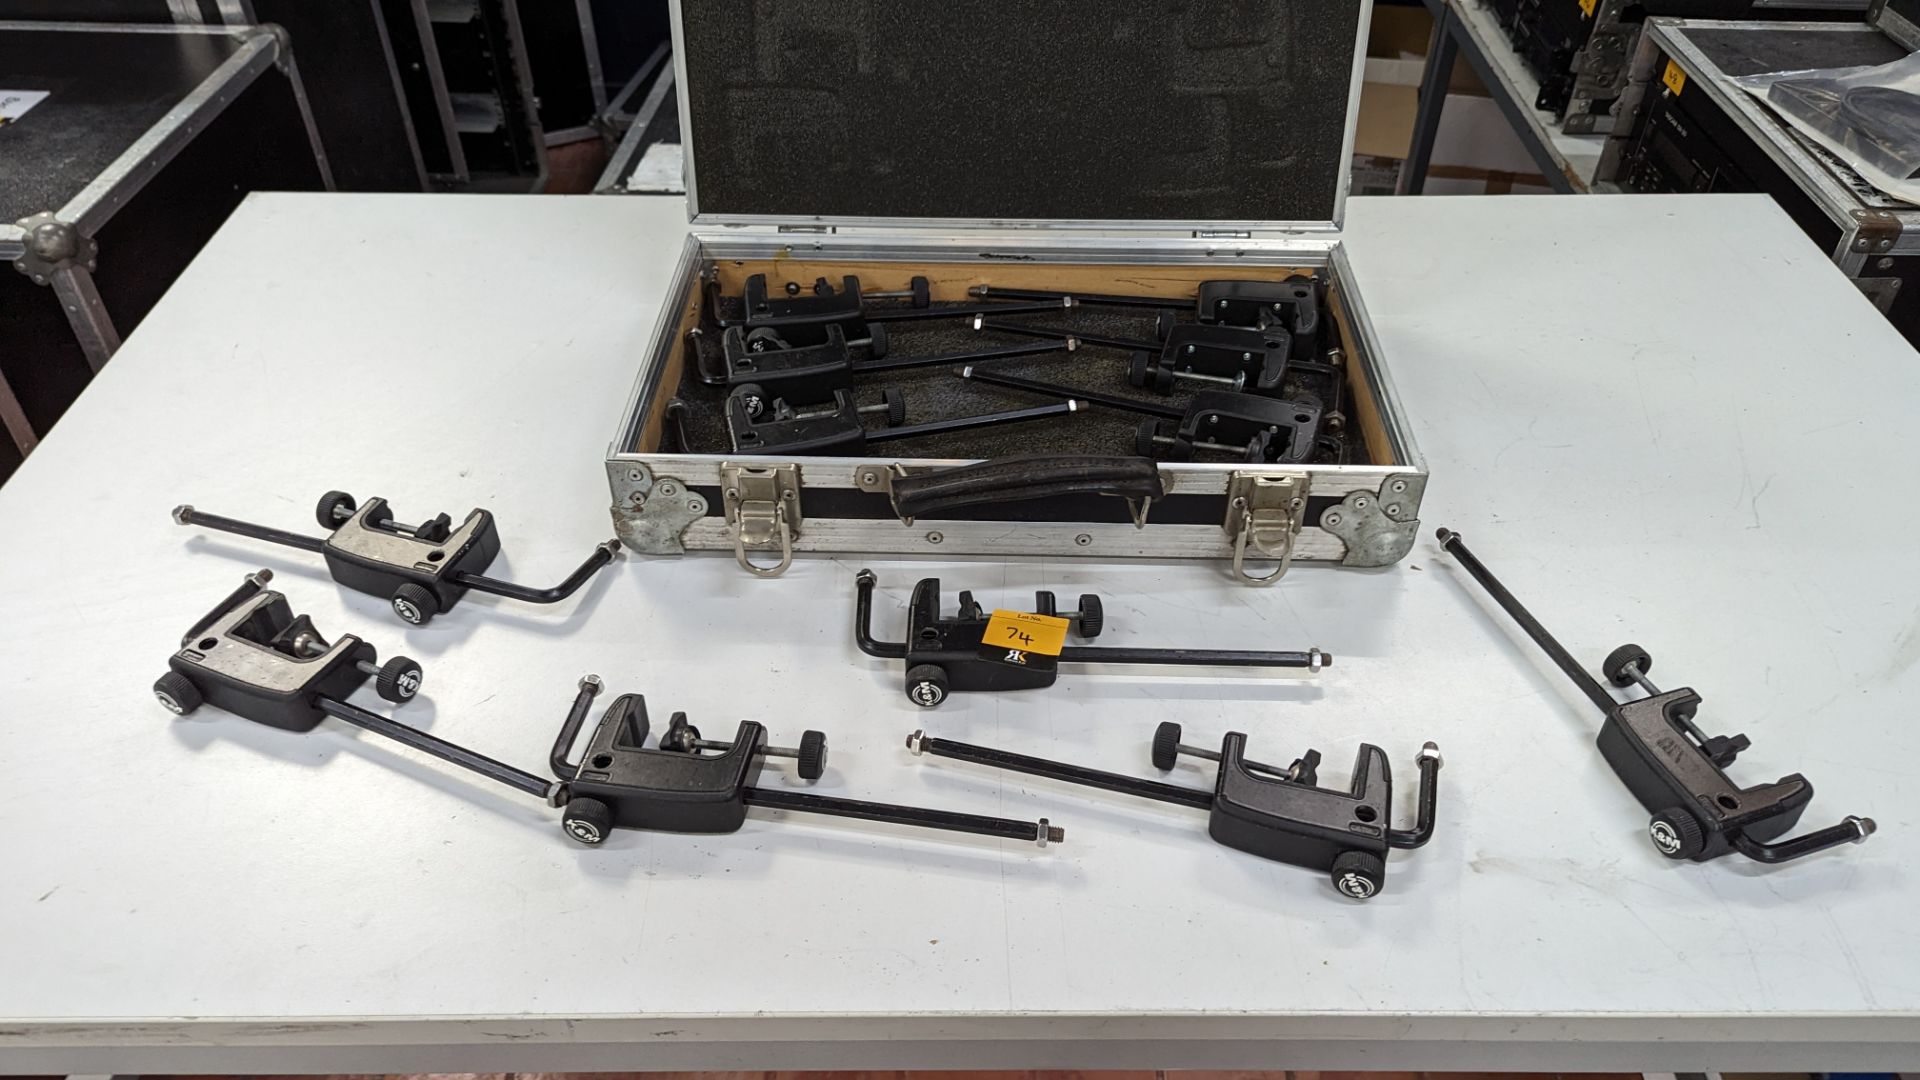 12 off K&M model 240/5 universal microphone holders. Including flight case. Total lot weight: 12kg